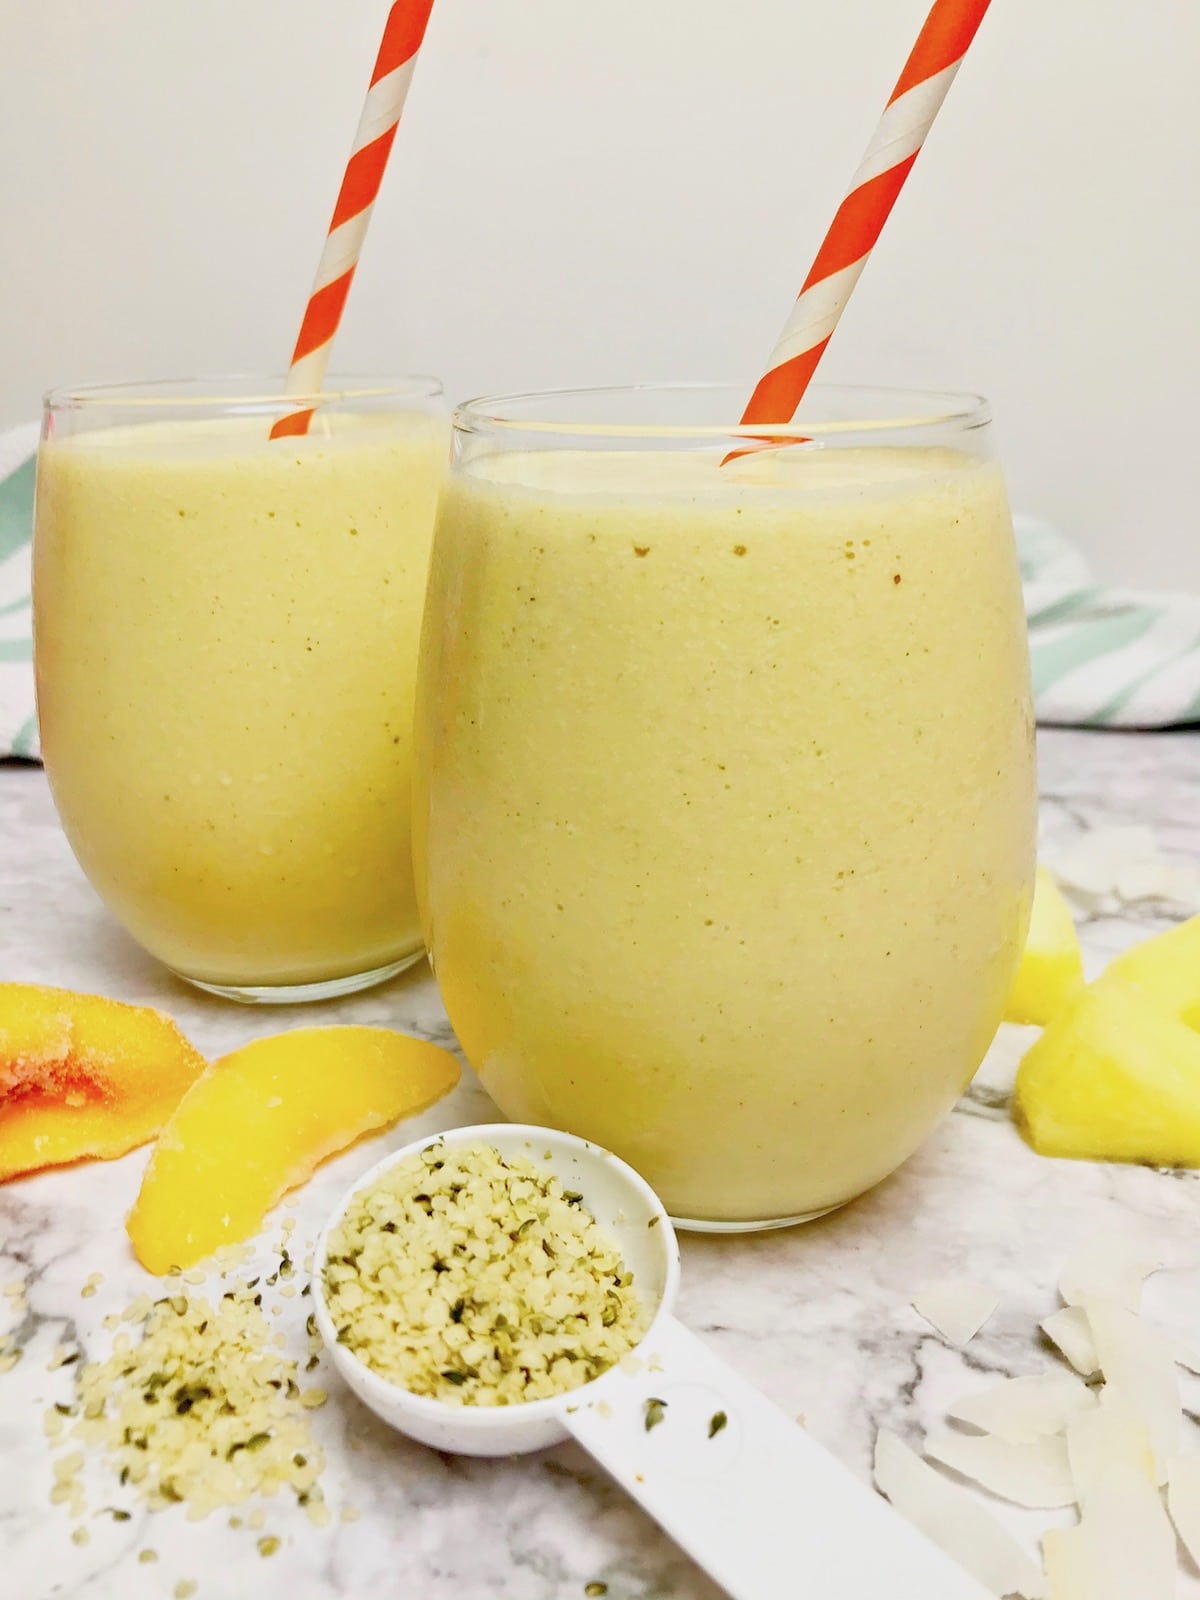 Two pineapple peach smoothies with orange and white striped straws.